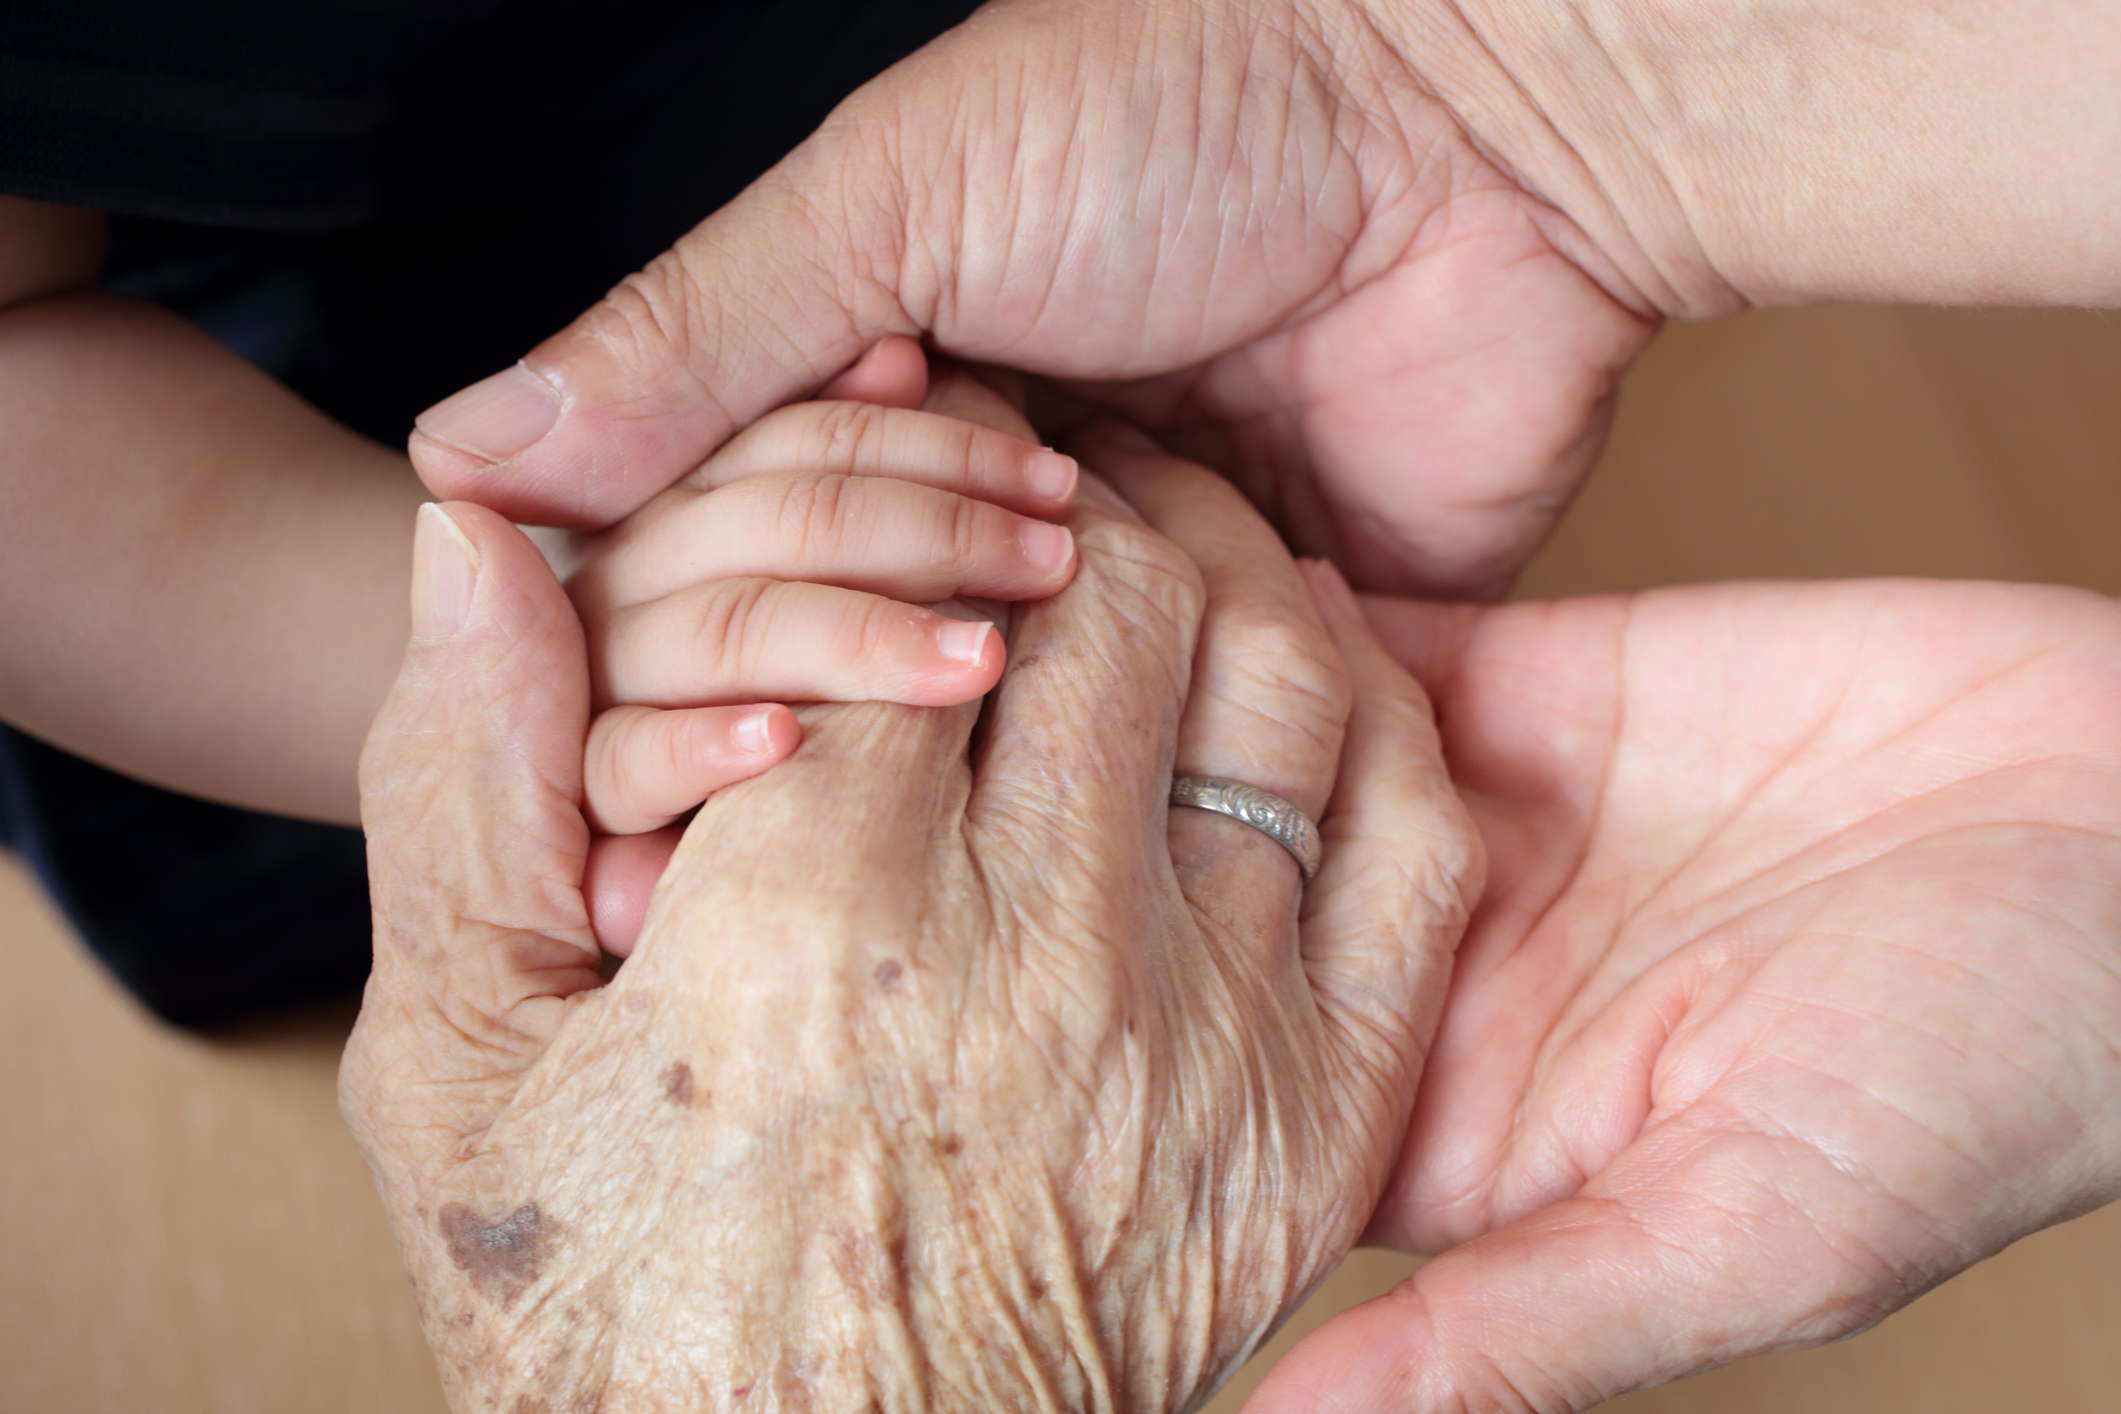 Four hands from different age groups are gently holding each other, symbolizing unity and connection across generations